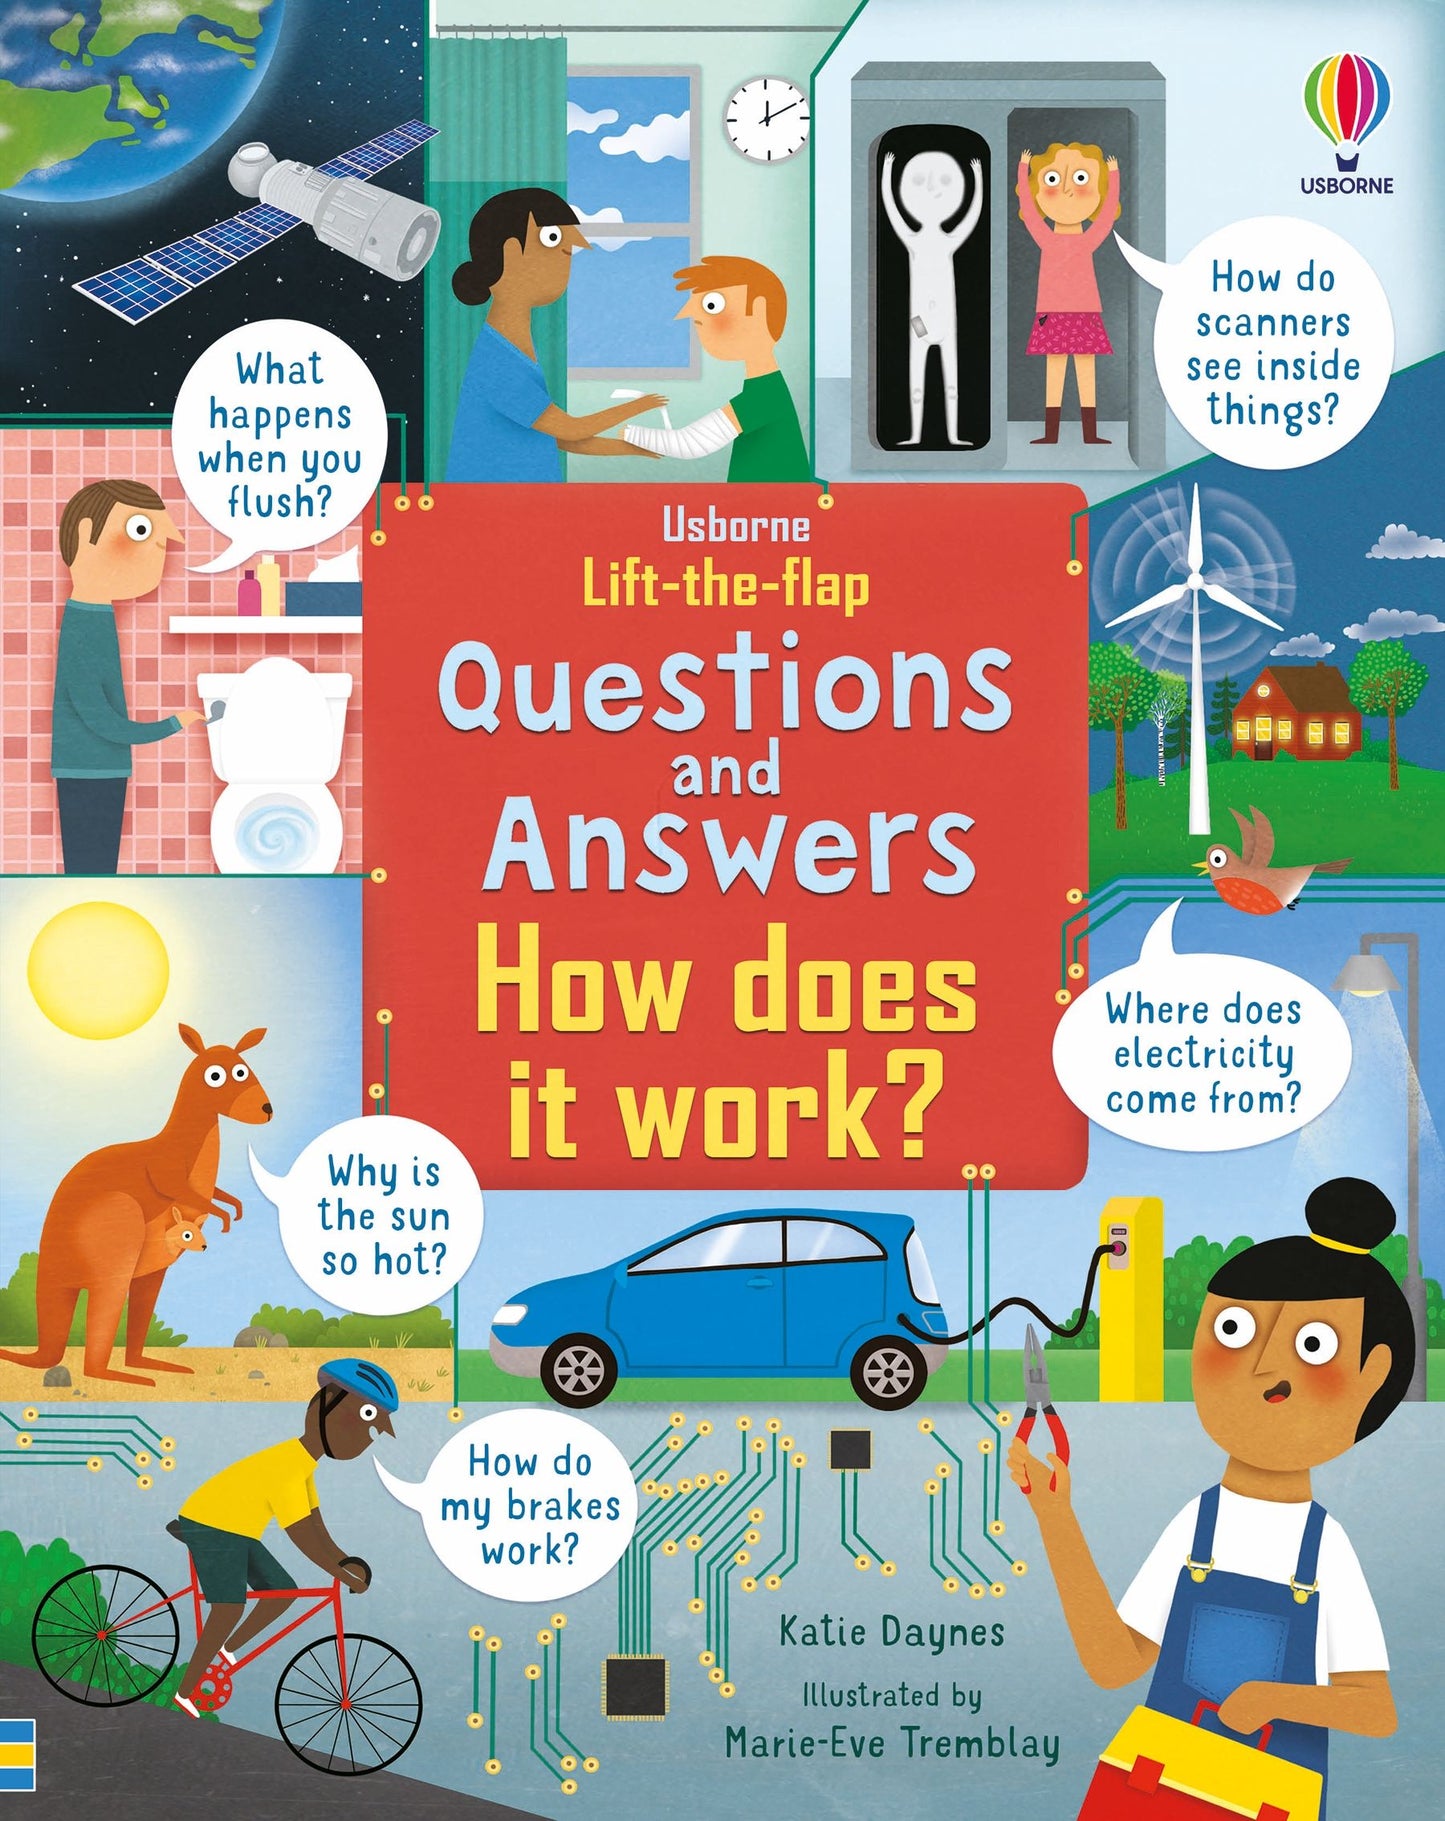 Question and Answers  (4 Books) (8411677196505) (8438316564697)